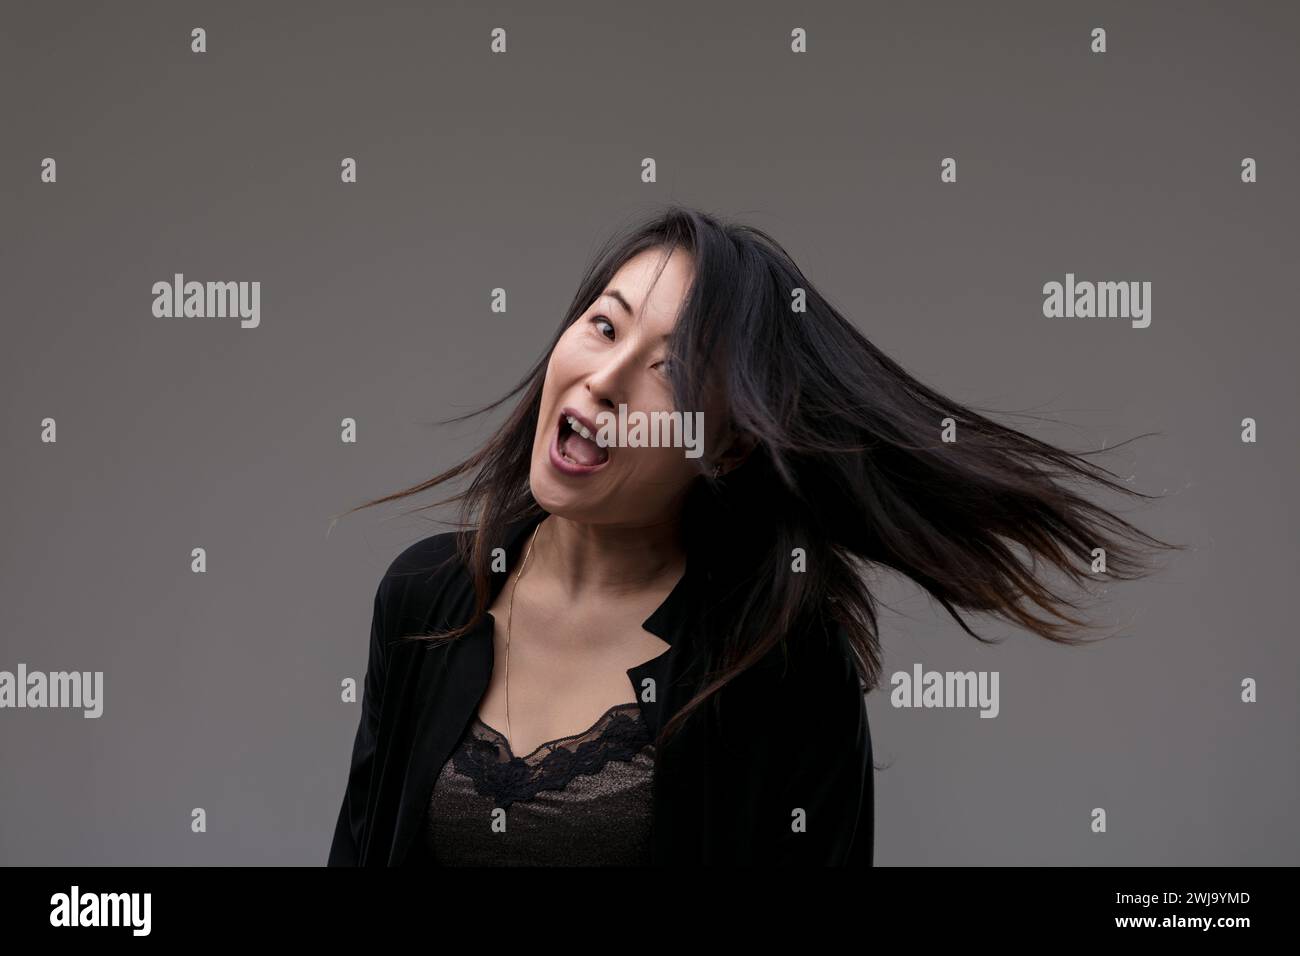 Her laughter rings out, hair tousled by joy, capturing a spontaneous burst of delight Stock Photo